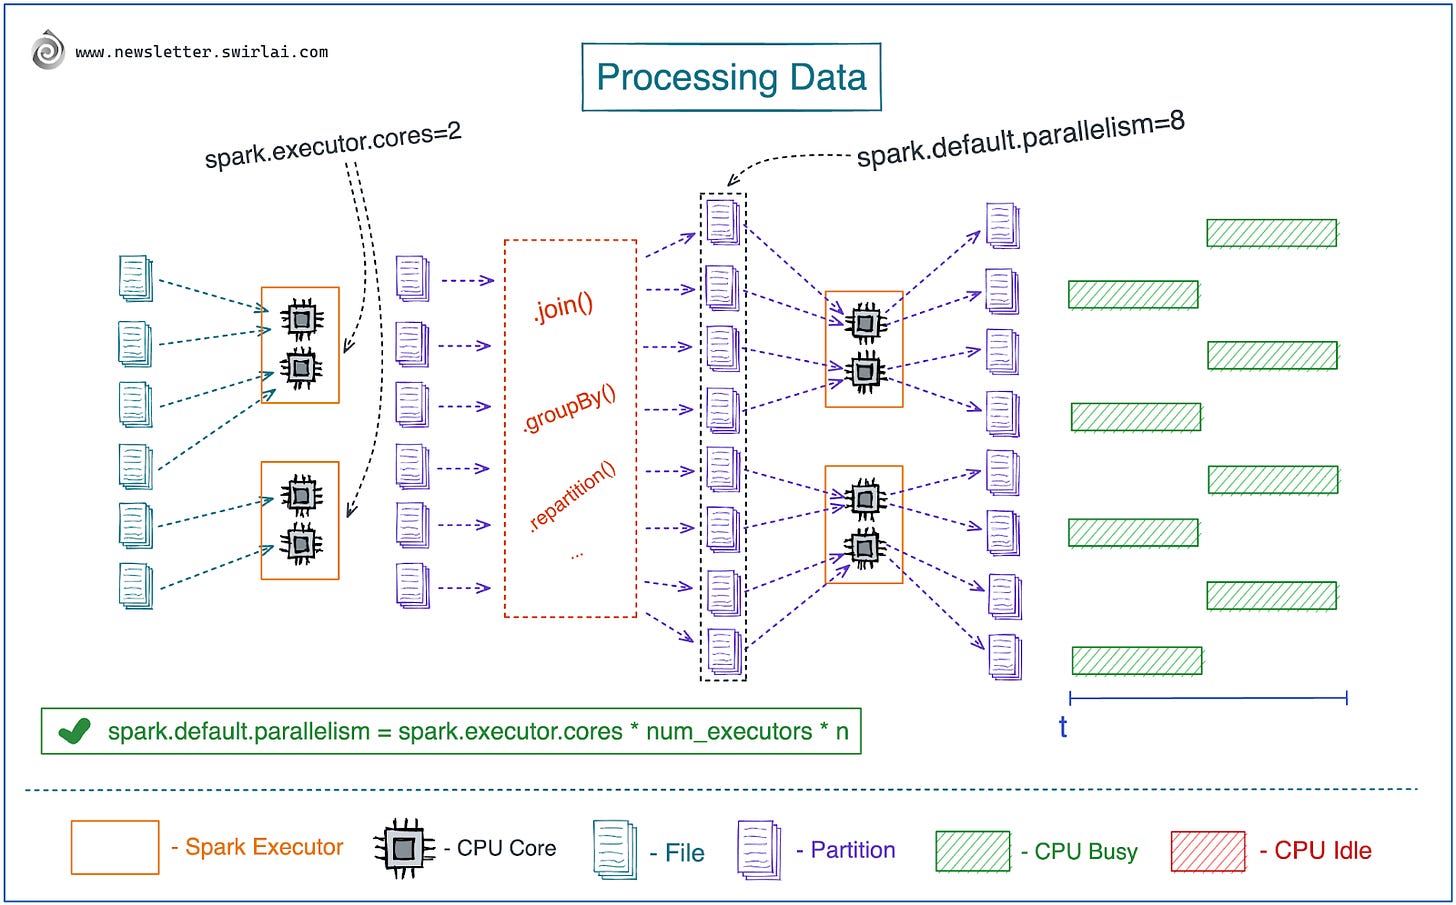 Parallelism when Processing Data